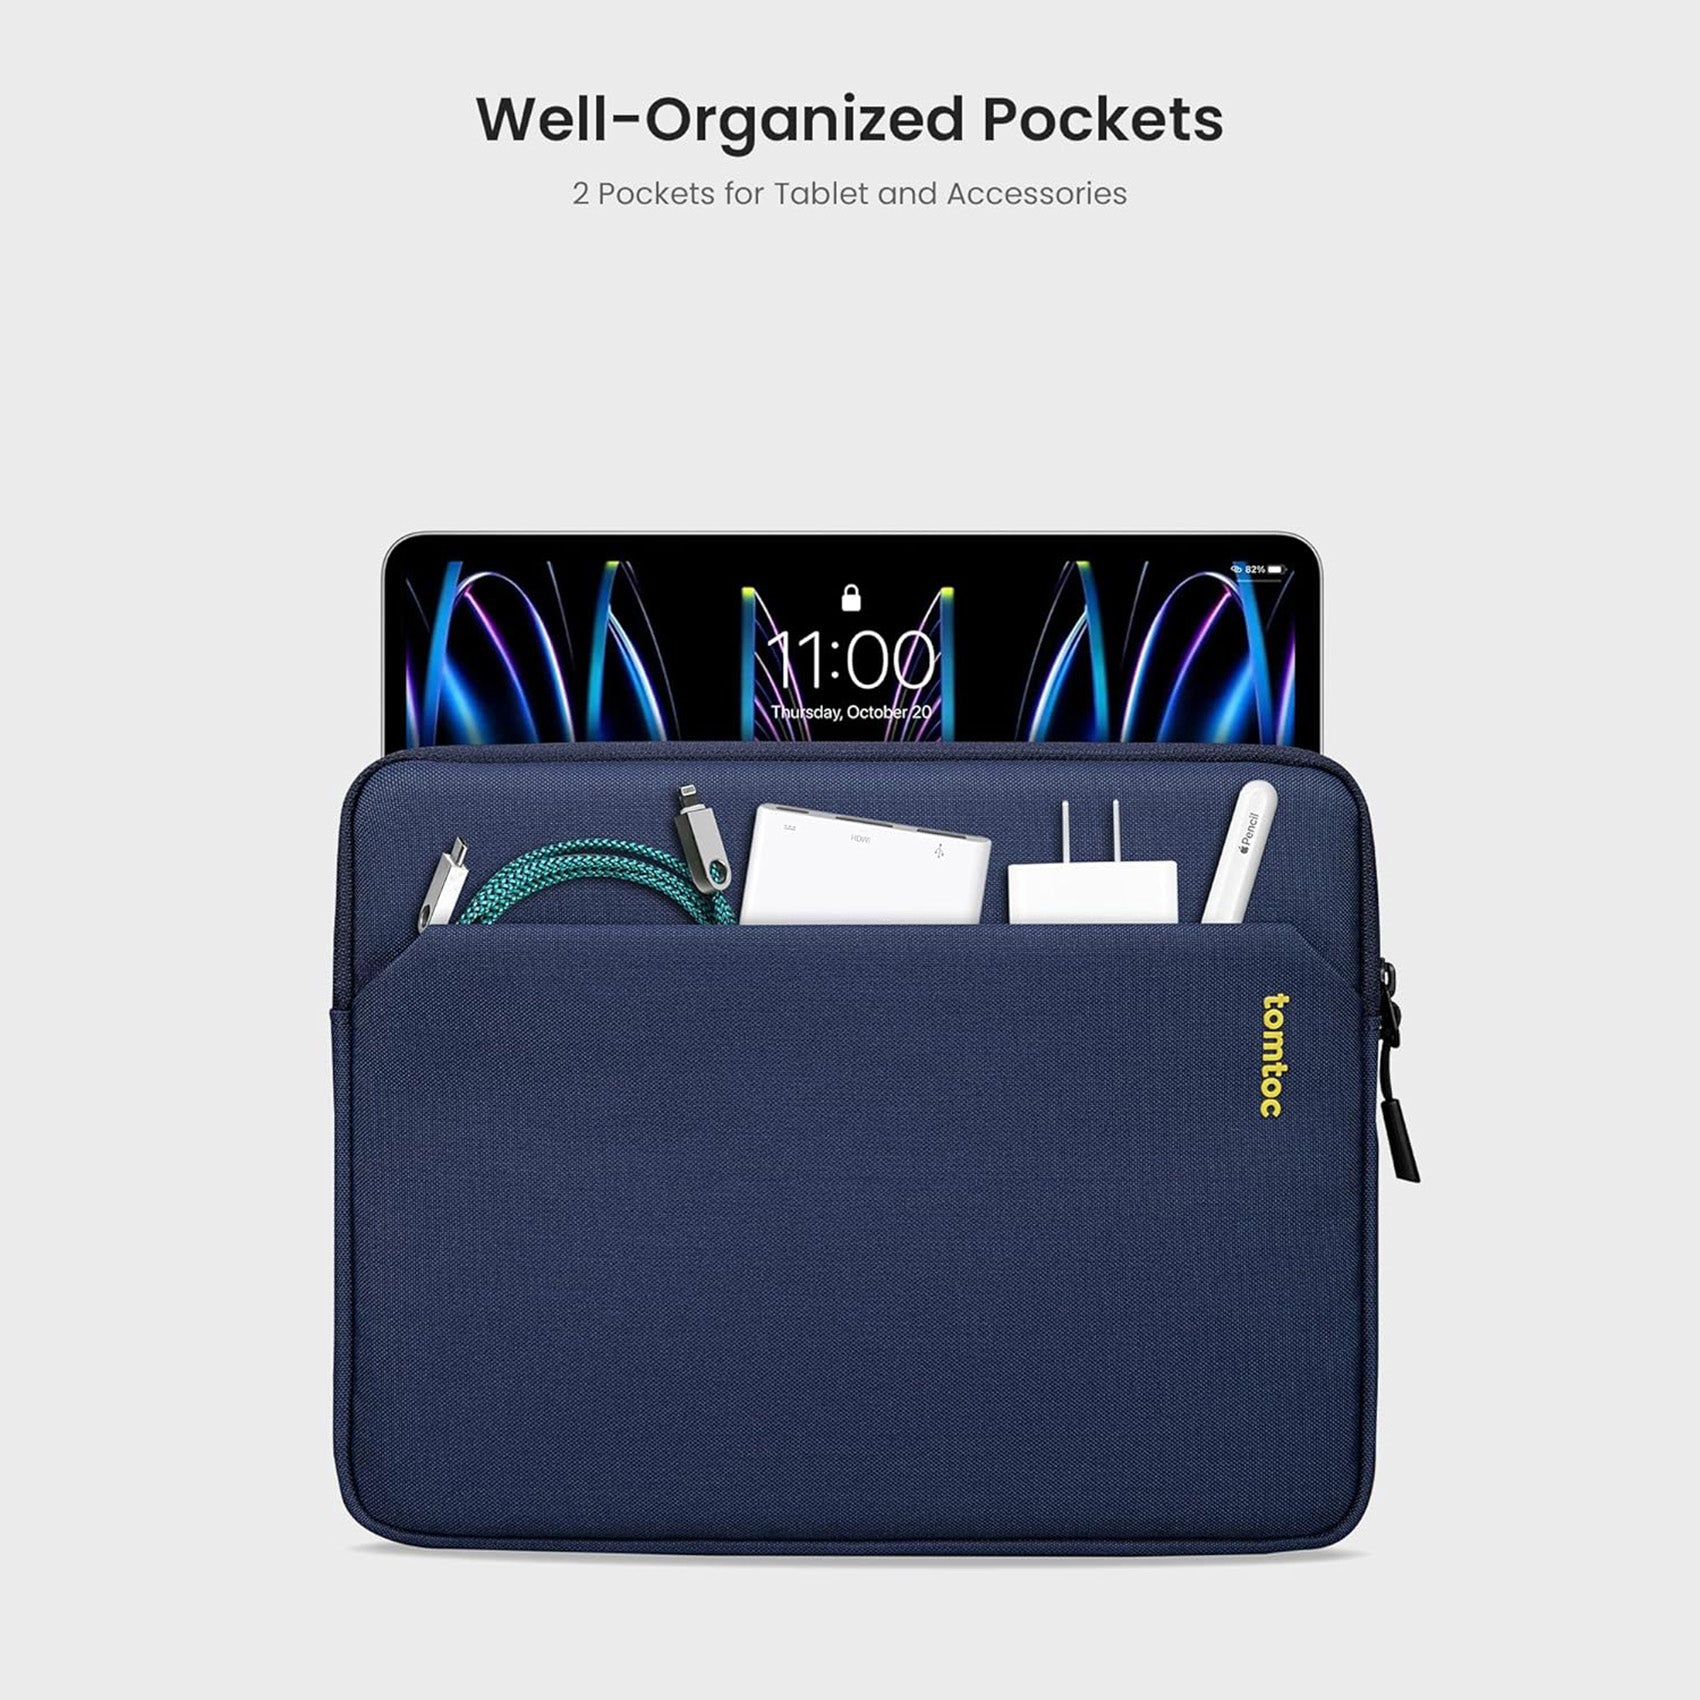 tomtoc 11 Inch Tablet Sleeve Bag - Navy Blue